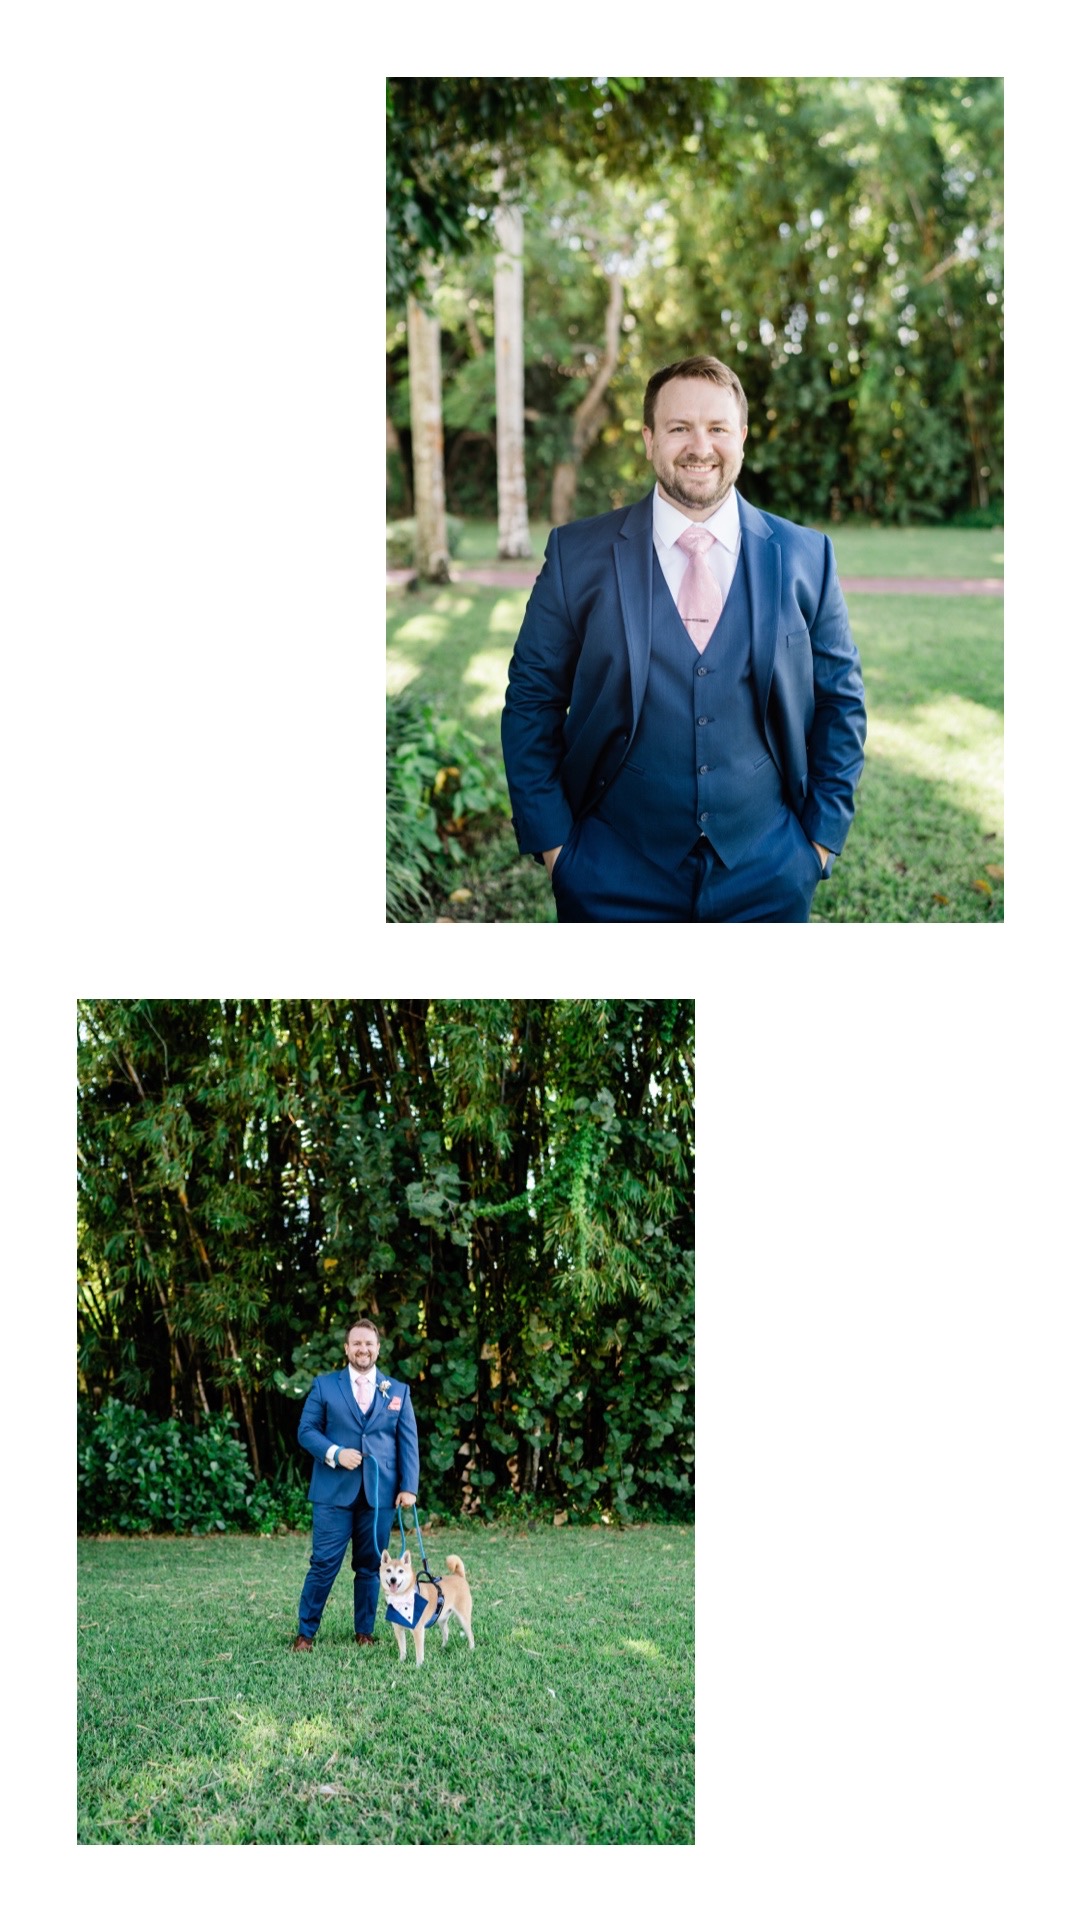 Florida groom smiles with his dog. Dog wears a tuxedo and groom wears a navy blue suit and pale pink tie